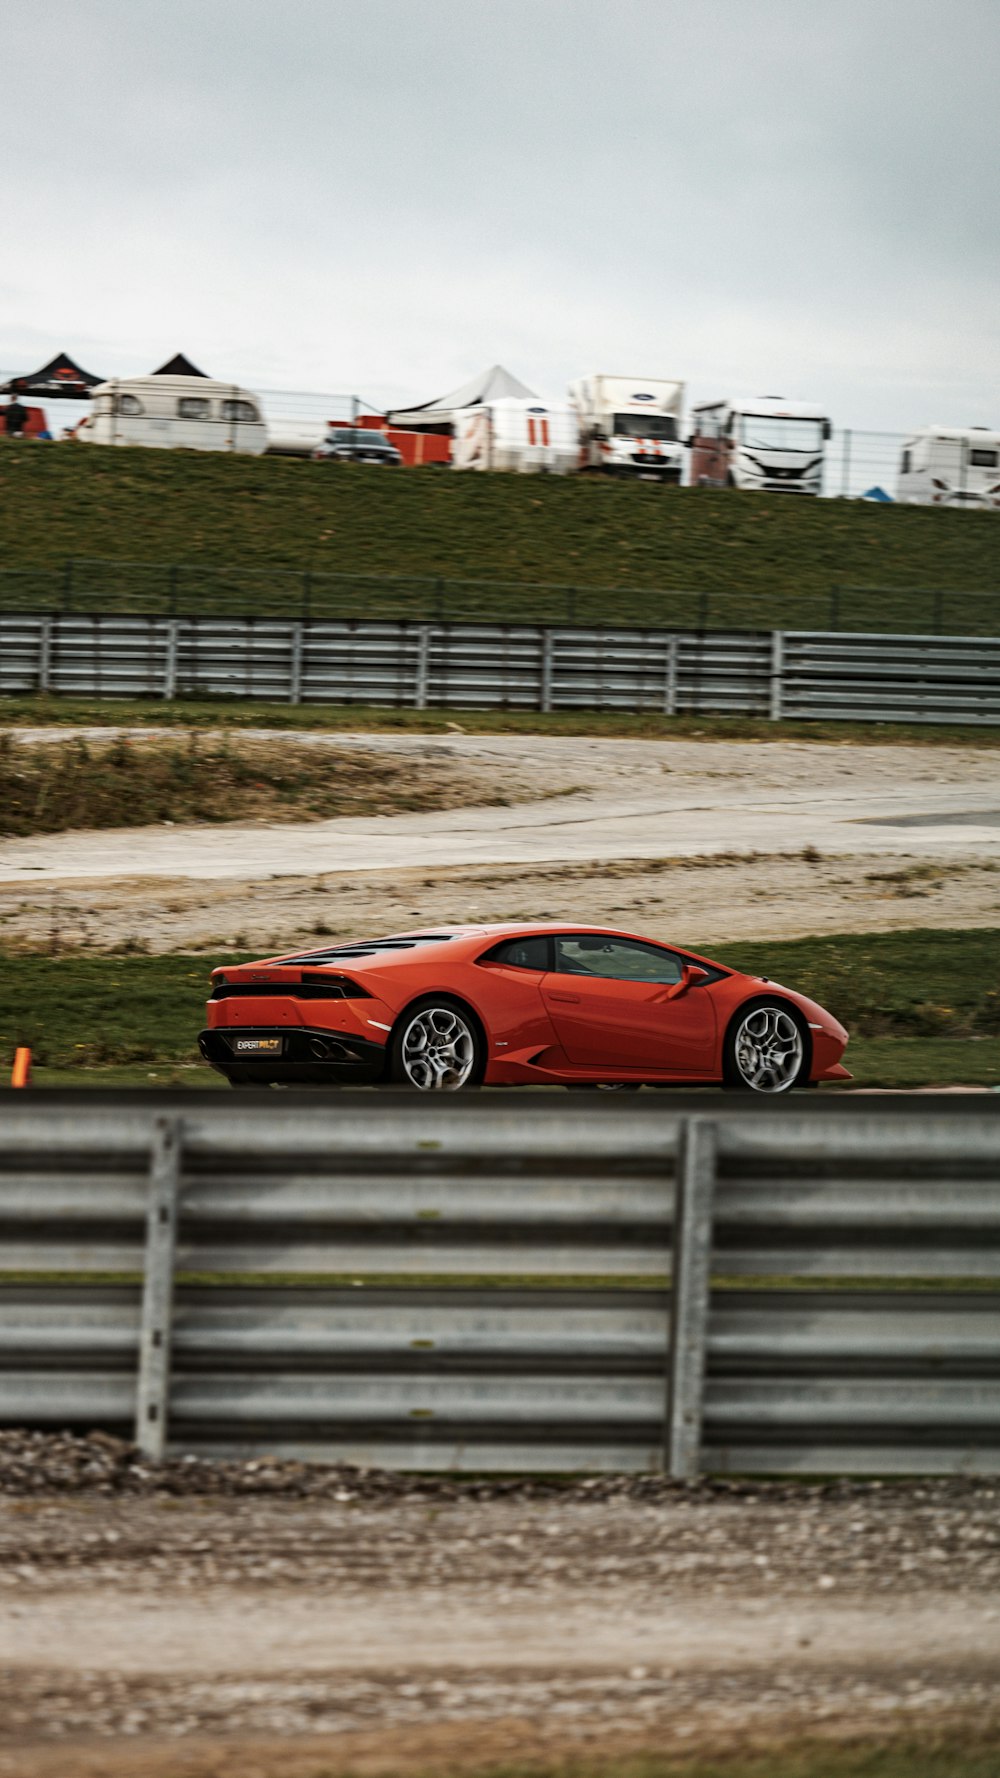 a red sports car driving on a track